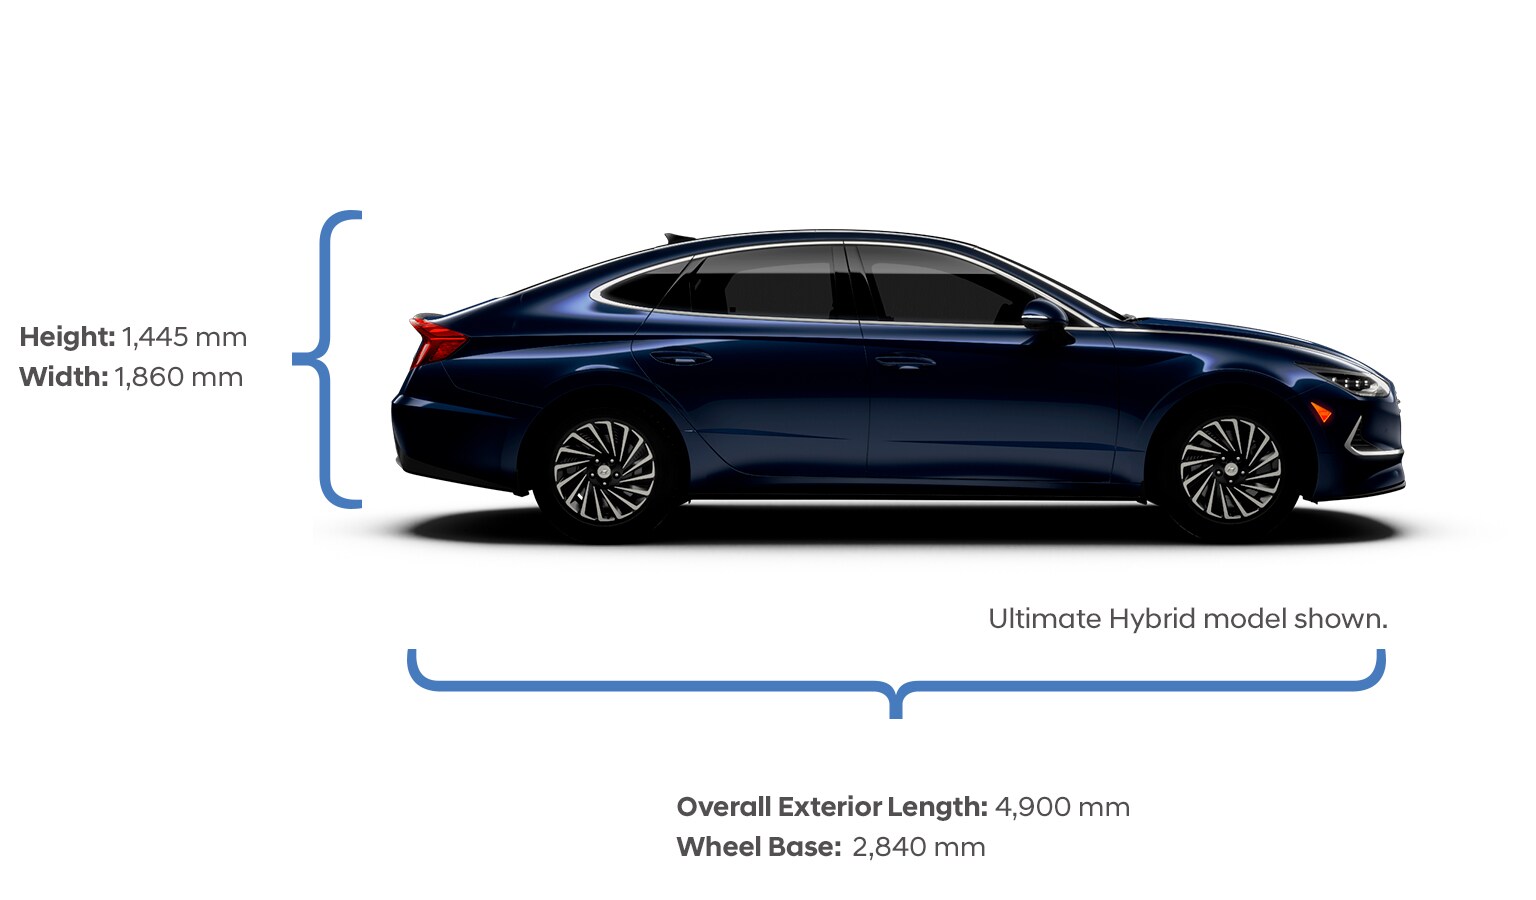 Height and width specifications of the 2022 SONATA